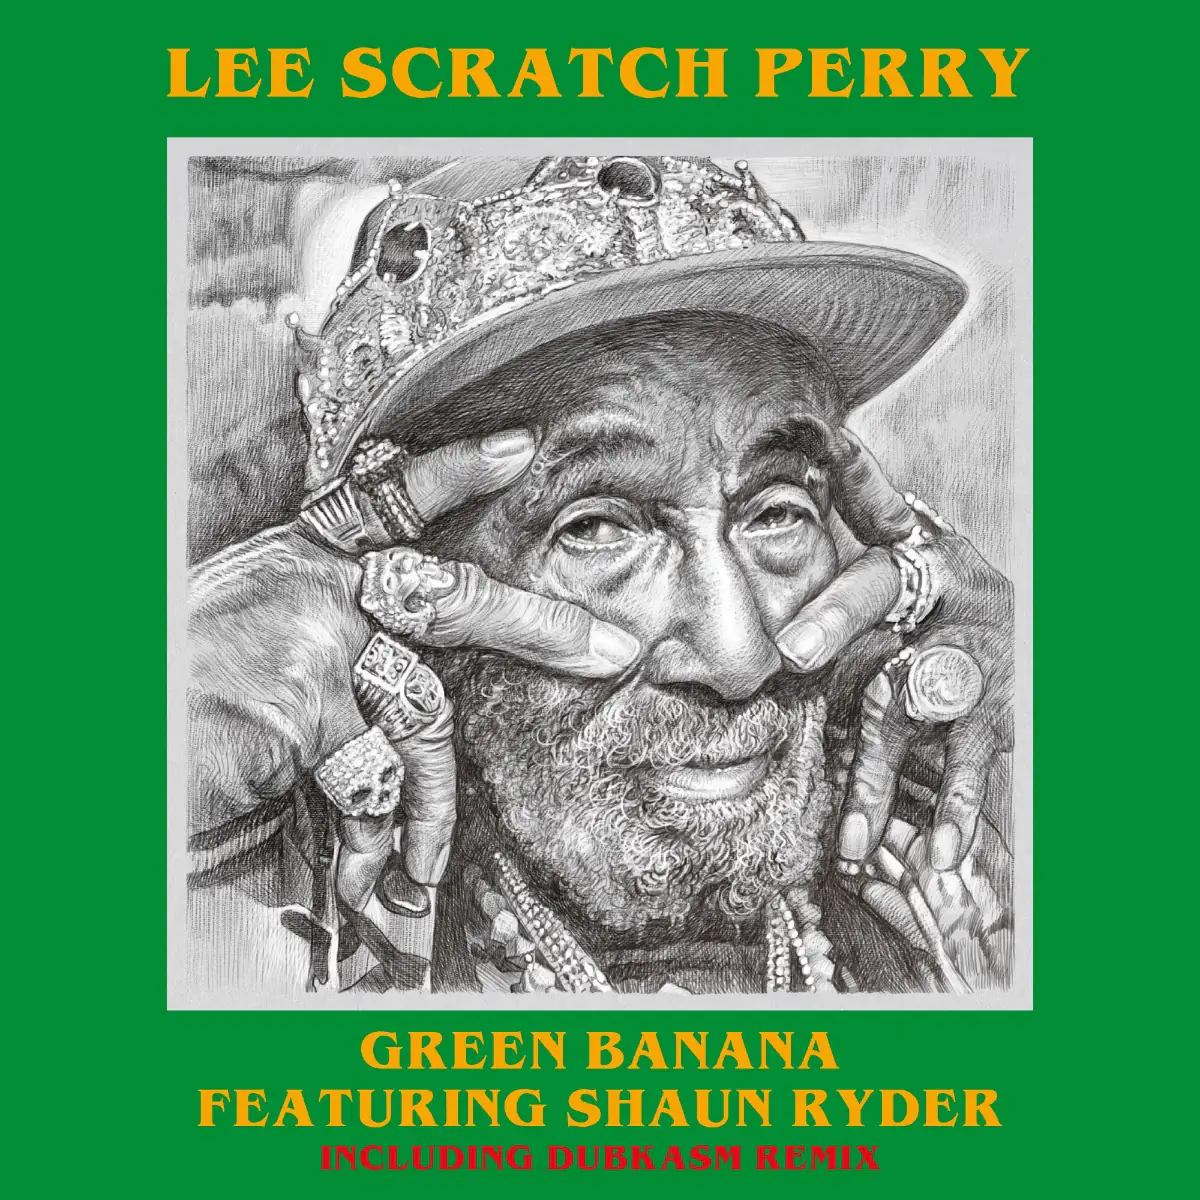 Shaun Ryder teams up with Lee “Scratch” Perry on new track ‘Green Banana’